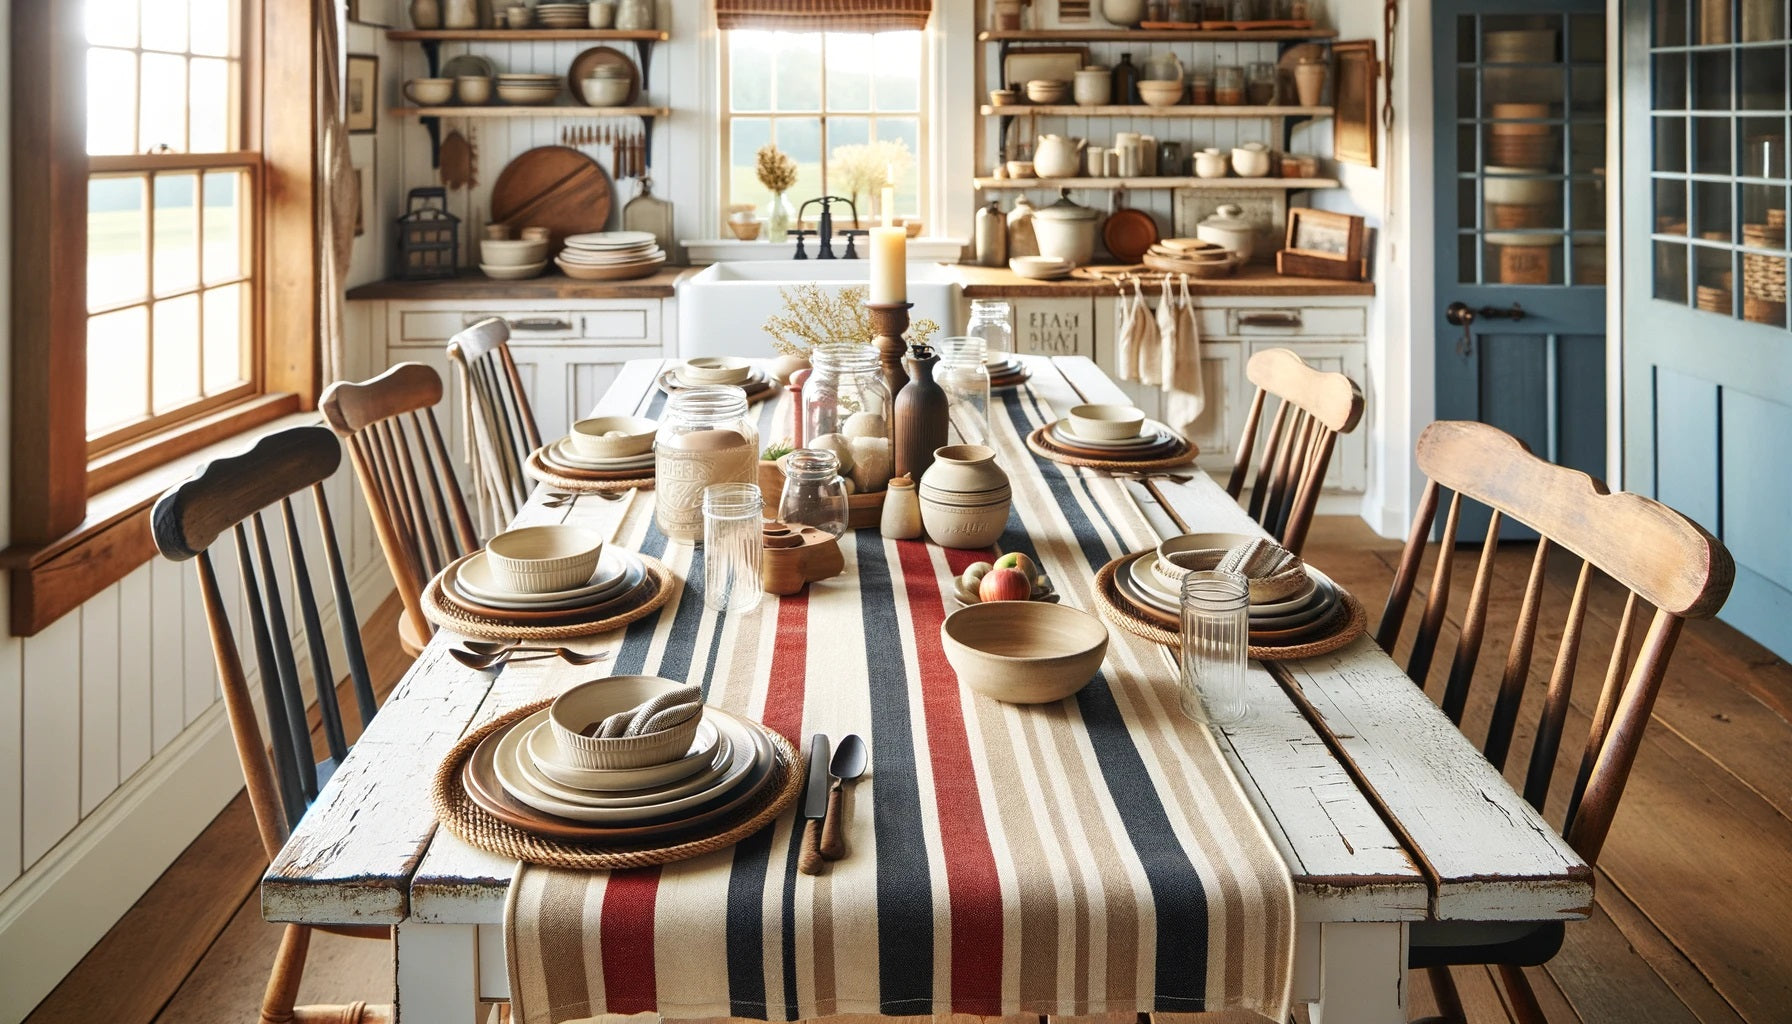 Country striped farmhouse table runner on a white rustic wooden table with bold stripes in red, navy, beige, and cream, complemented by wooden serveware, ceramic dishes, and mason jar centerpieces in a quaint farmhouse kitchen setting